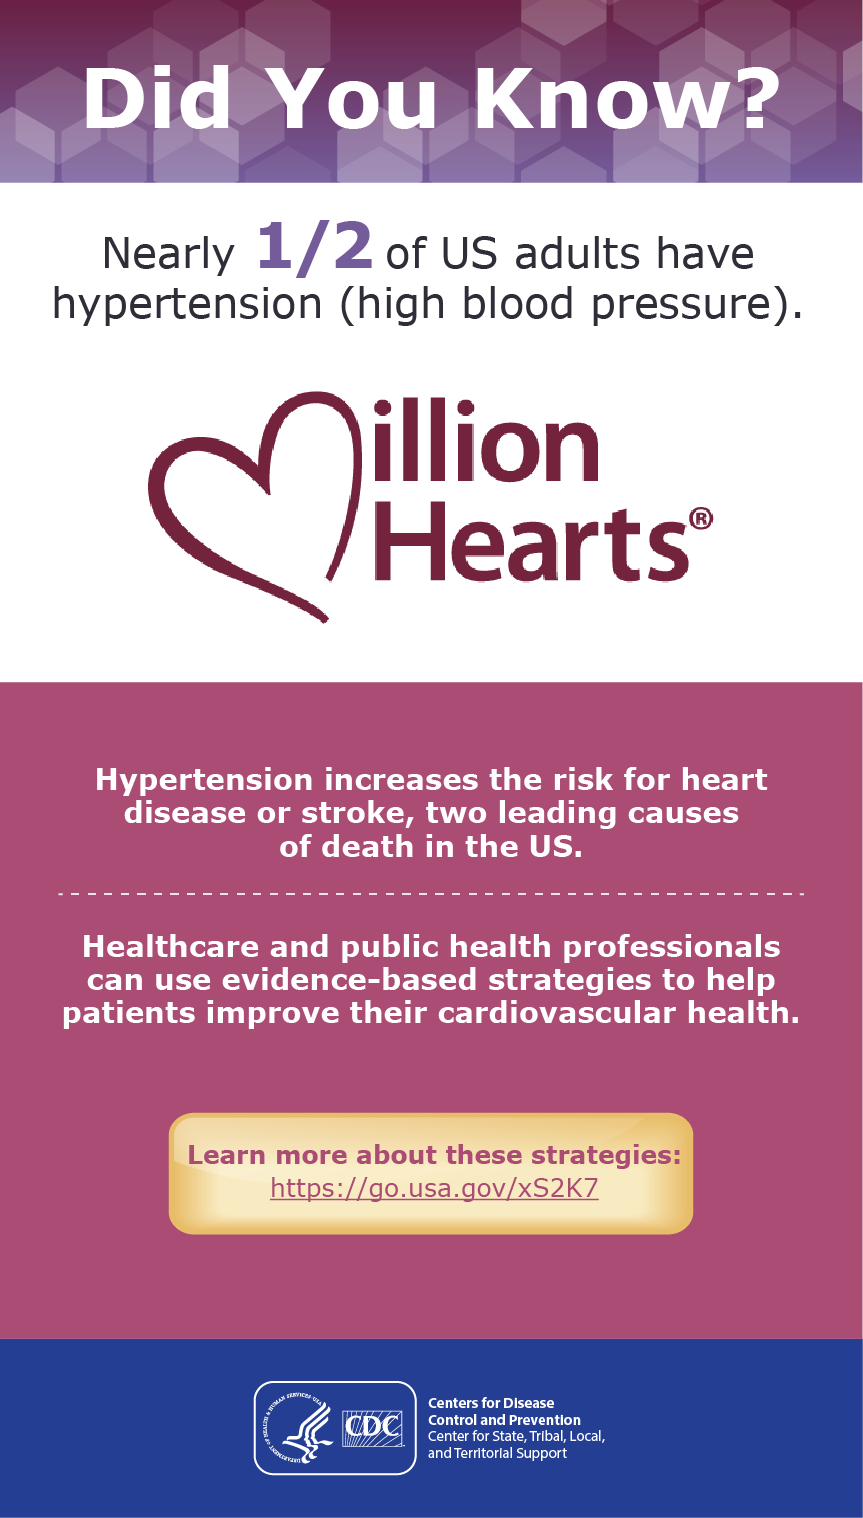 An infographic titled Did You Know? with image of the red Million Hearts® logo. Text says “Nearly half of US adults have hypertension (high blood pressure). Hypertension increases the risk for heart disease or stroke, two leading causes of death in the US. Healthcare and public health professionals can use evidence-based strategies to help patients improve their cardiovascular health. Learn more about these strategies: https://go.usa.gov/xS2K7"